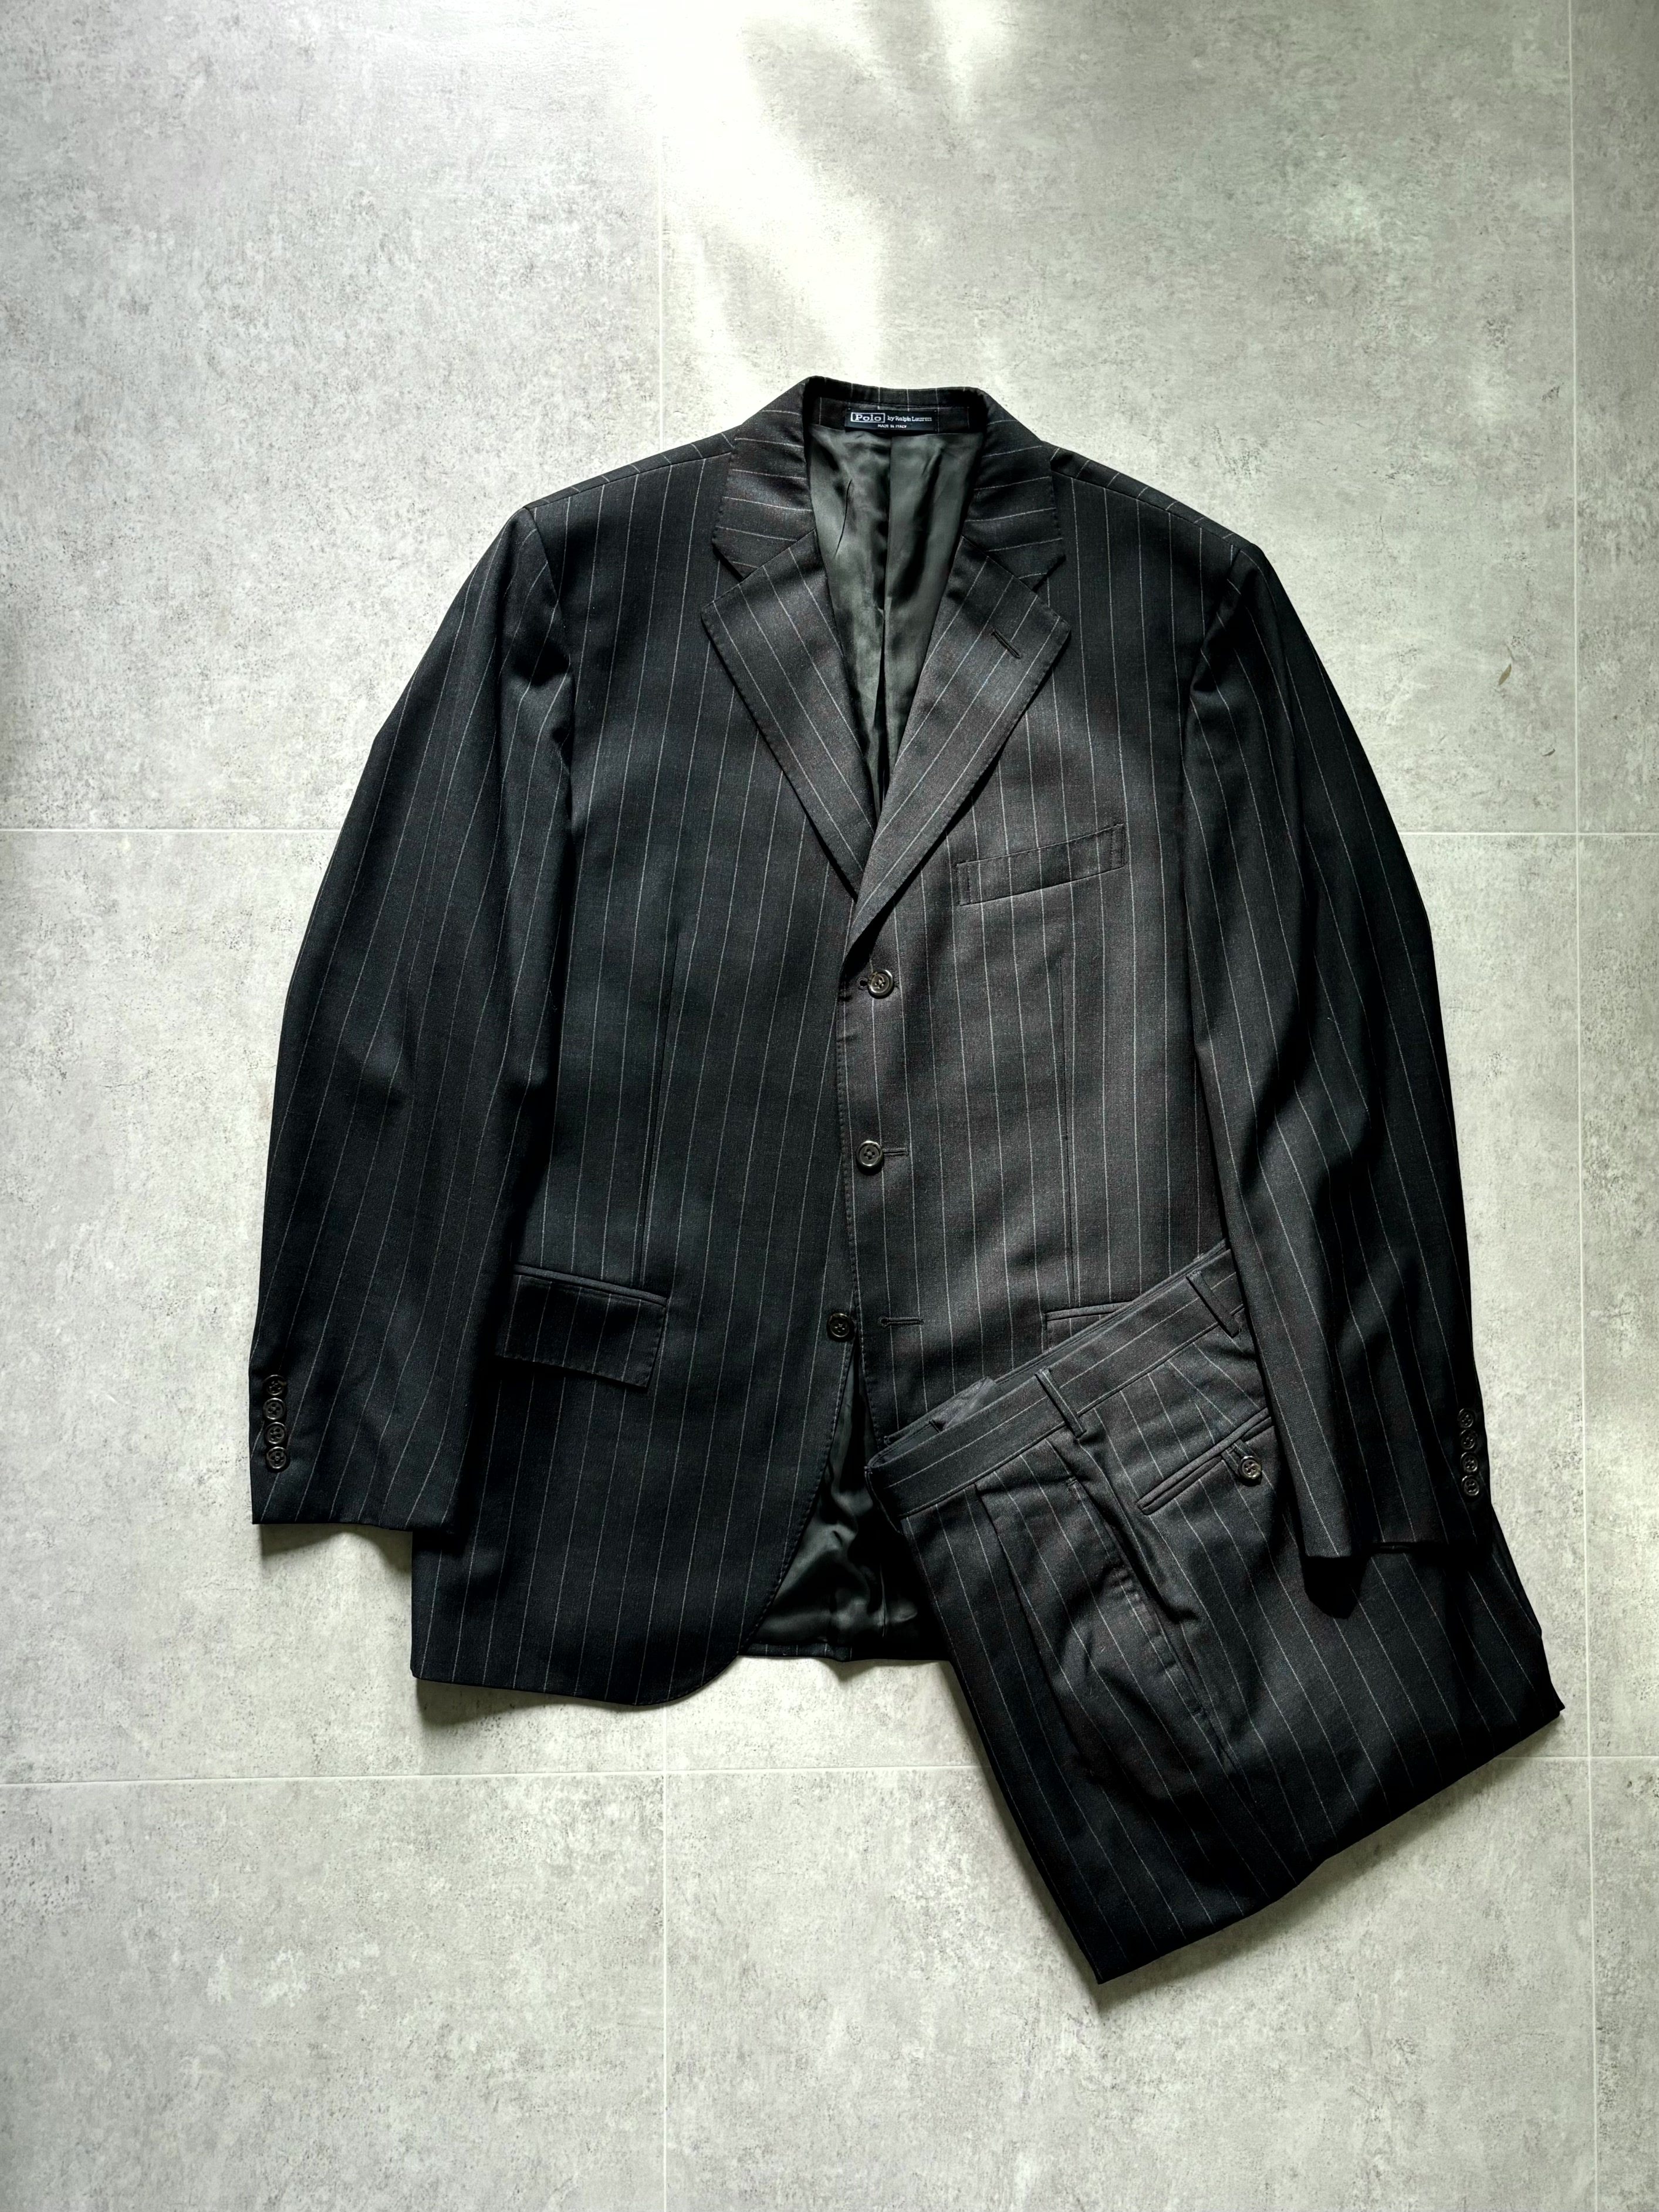 Polo Ralph Lauren Pin Striped Suit 42R Made In Italy - 체리피커